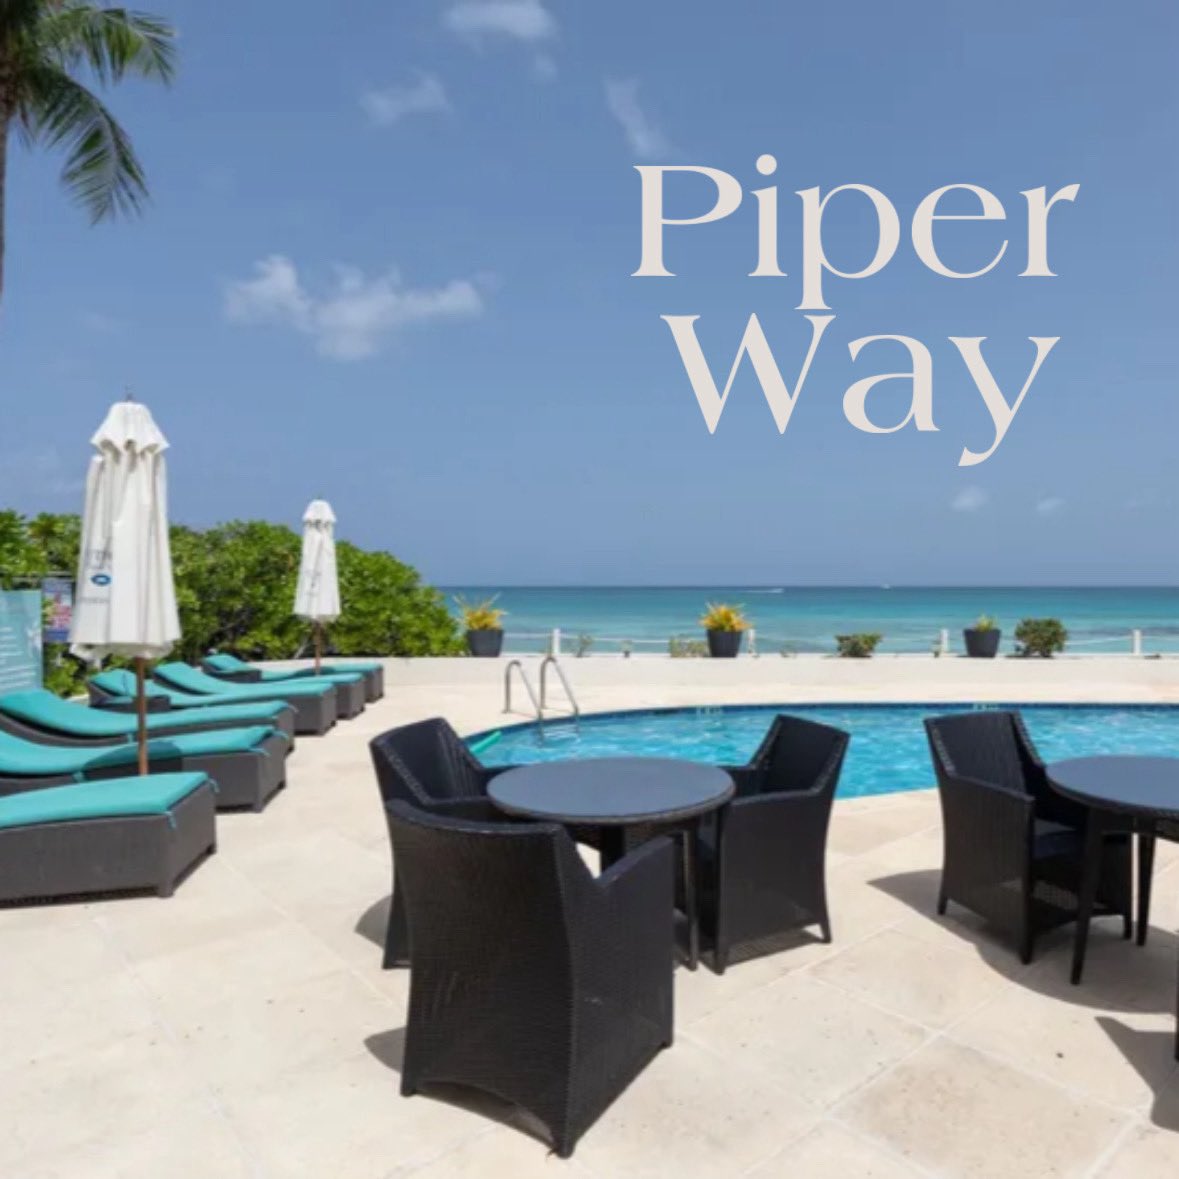 Piper Way

Amazing 5th floor luxury retreat featuring;

3 Bdrm
2 baths
2030 sq ft
Exquisite panoramic views
fitness centre
beach side pool

Member of CIREBA
MLS # 414634

#Luxury #Retreat #Caribbean #Scuba #Snorkel 
#CaymanRealEstate #caymansothebysrealty #caymanislandsrealestate